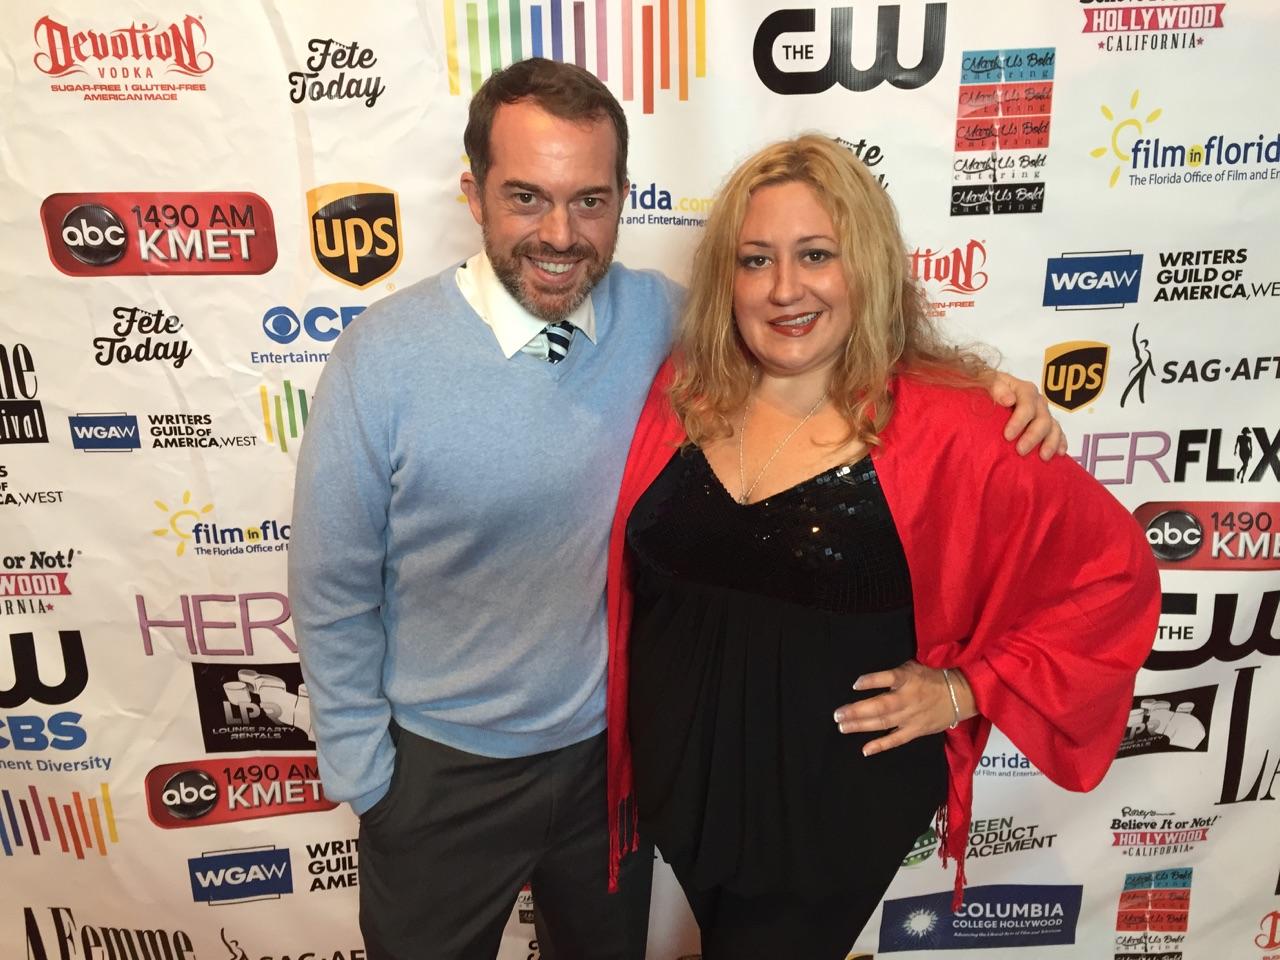 Brian Linsley with Director Leigh Stewart at The La Femme Film Festival in Beverly Hills